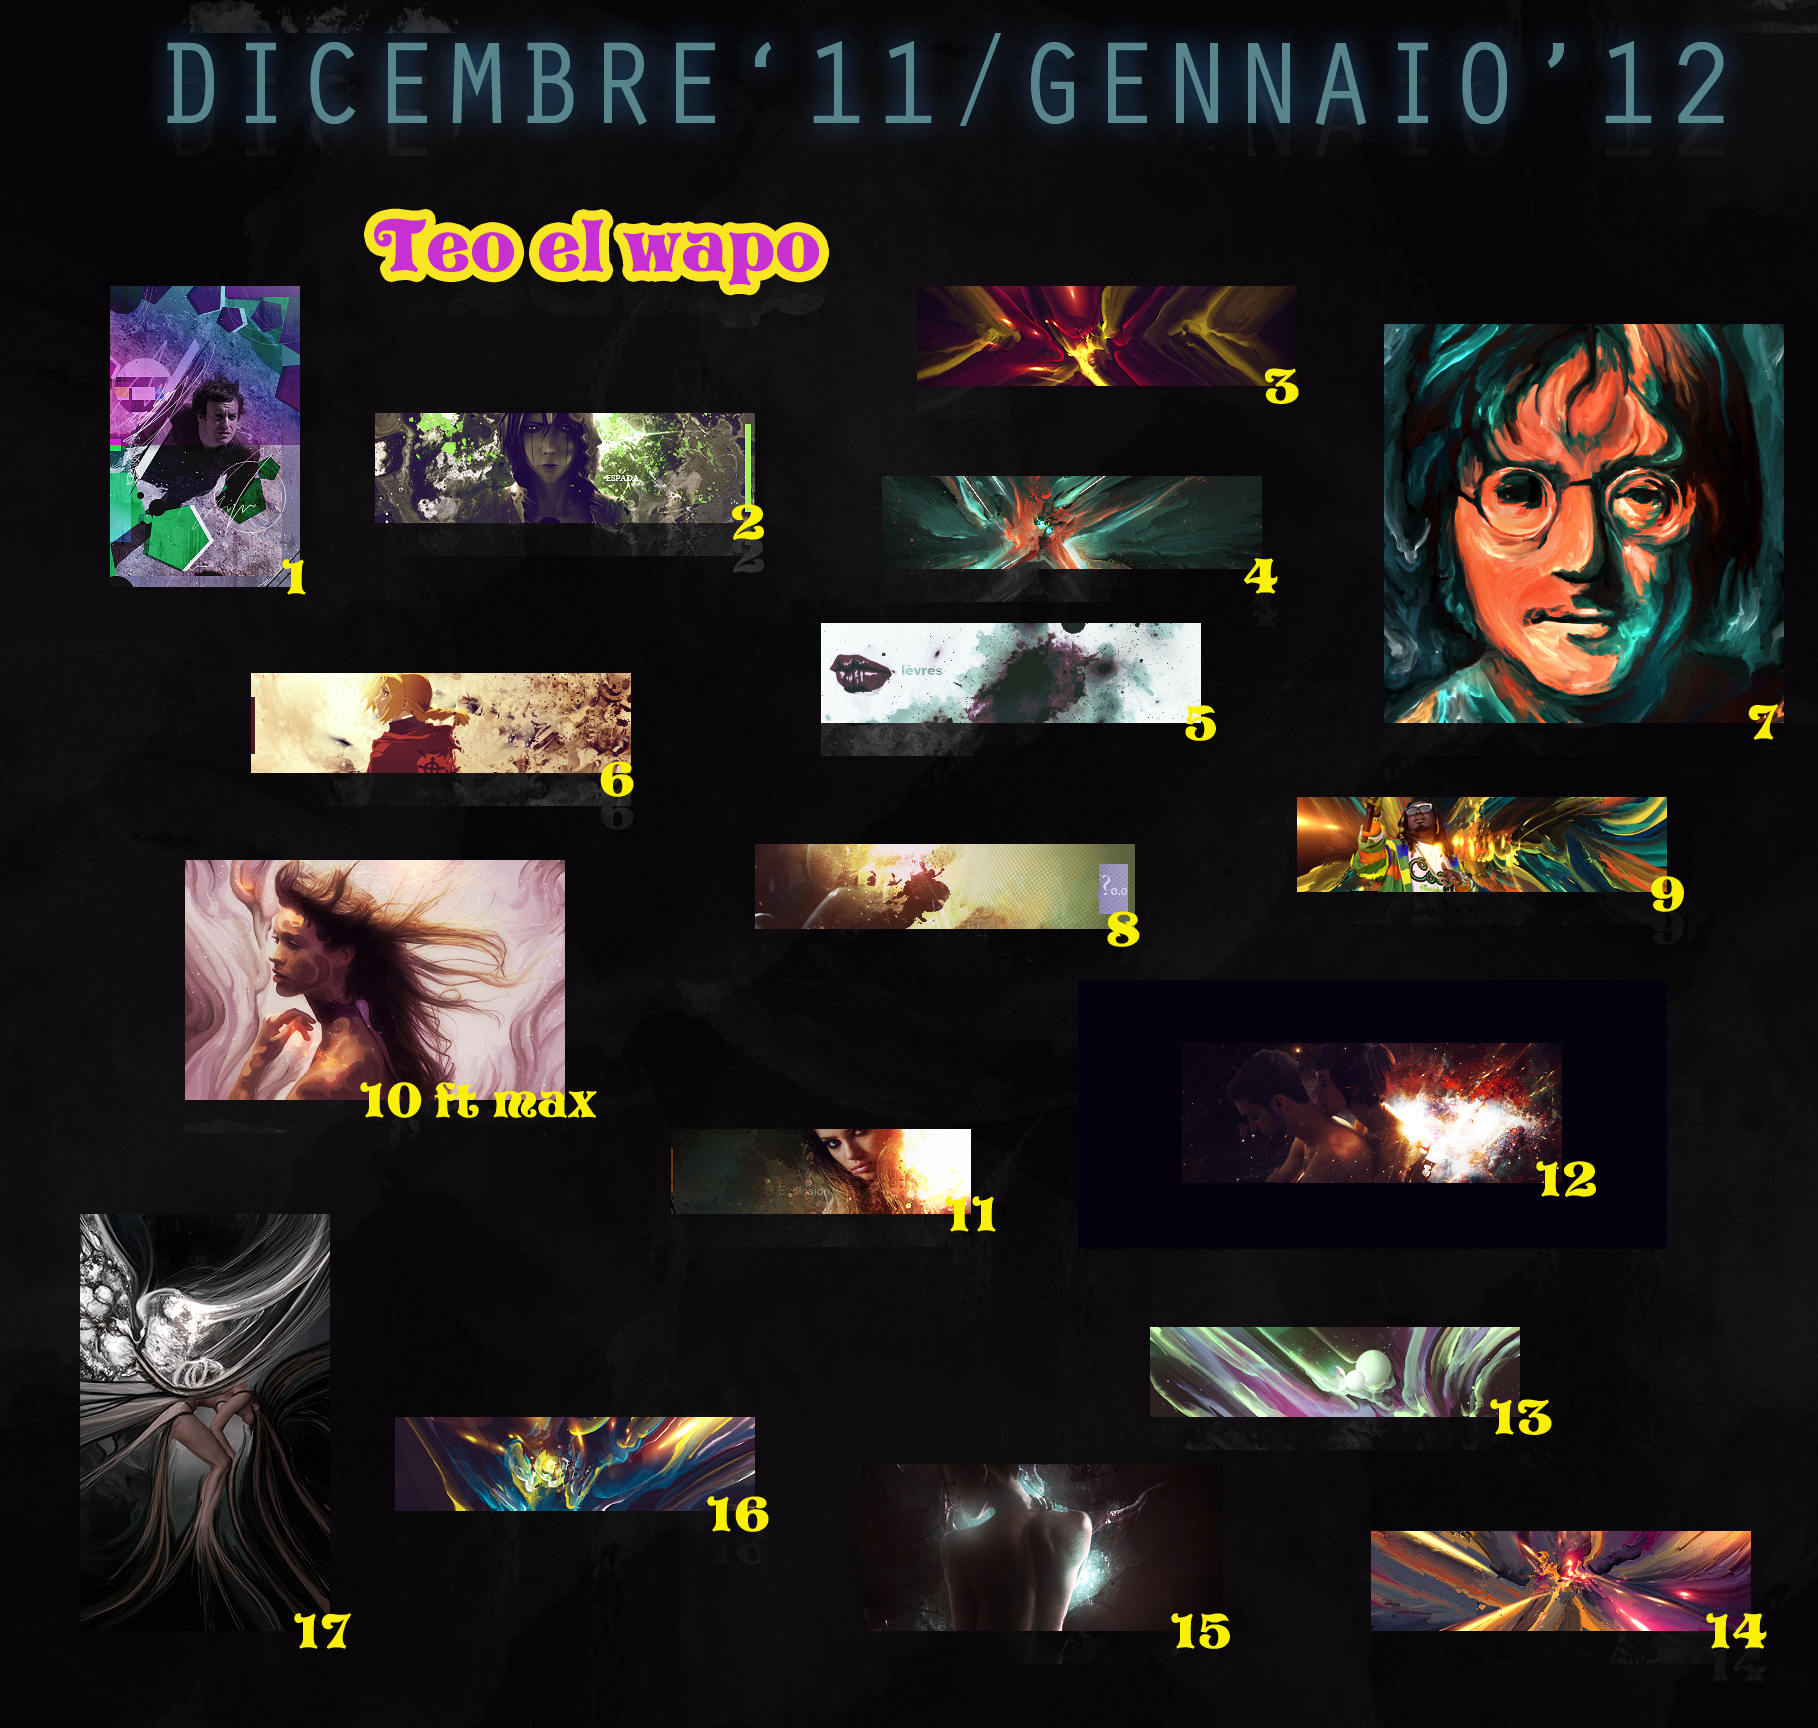 tag_wall_dicembre__11_gennaio___12_by_ascentem-d4oesky.png